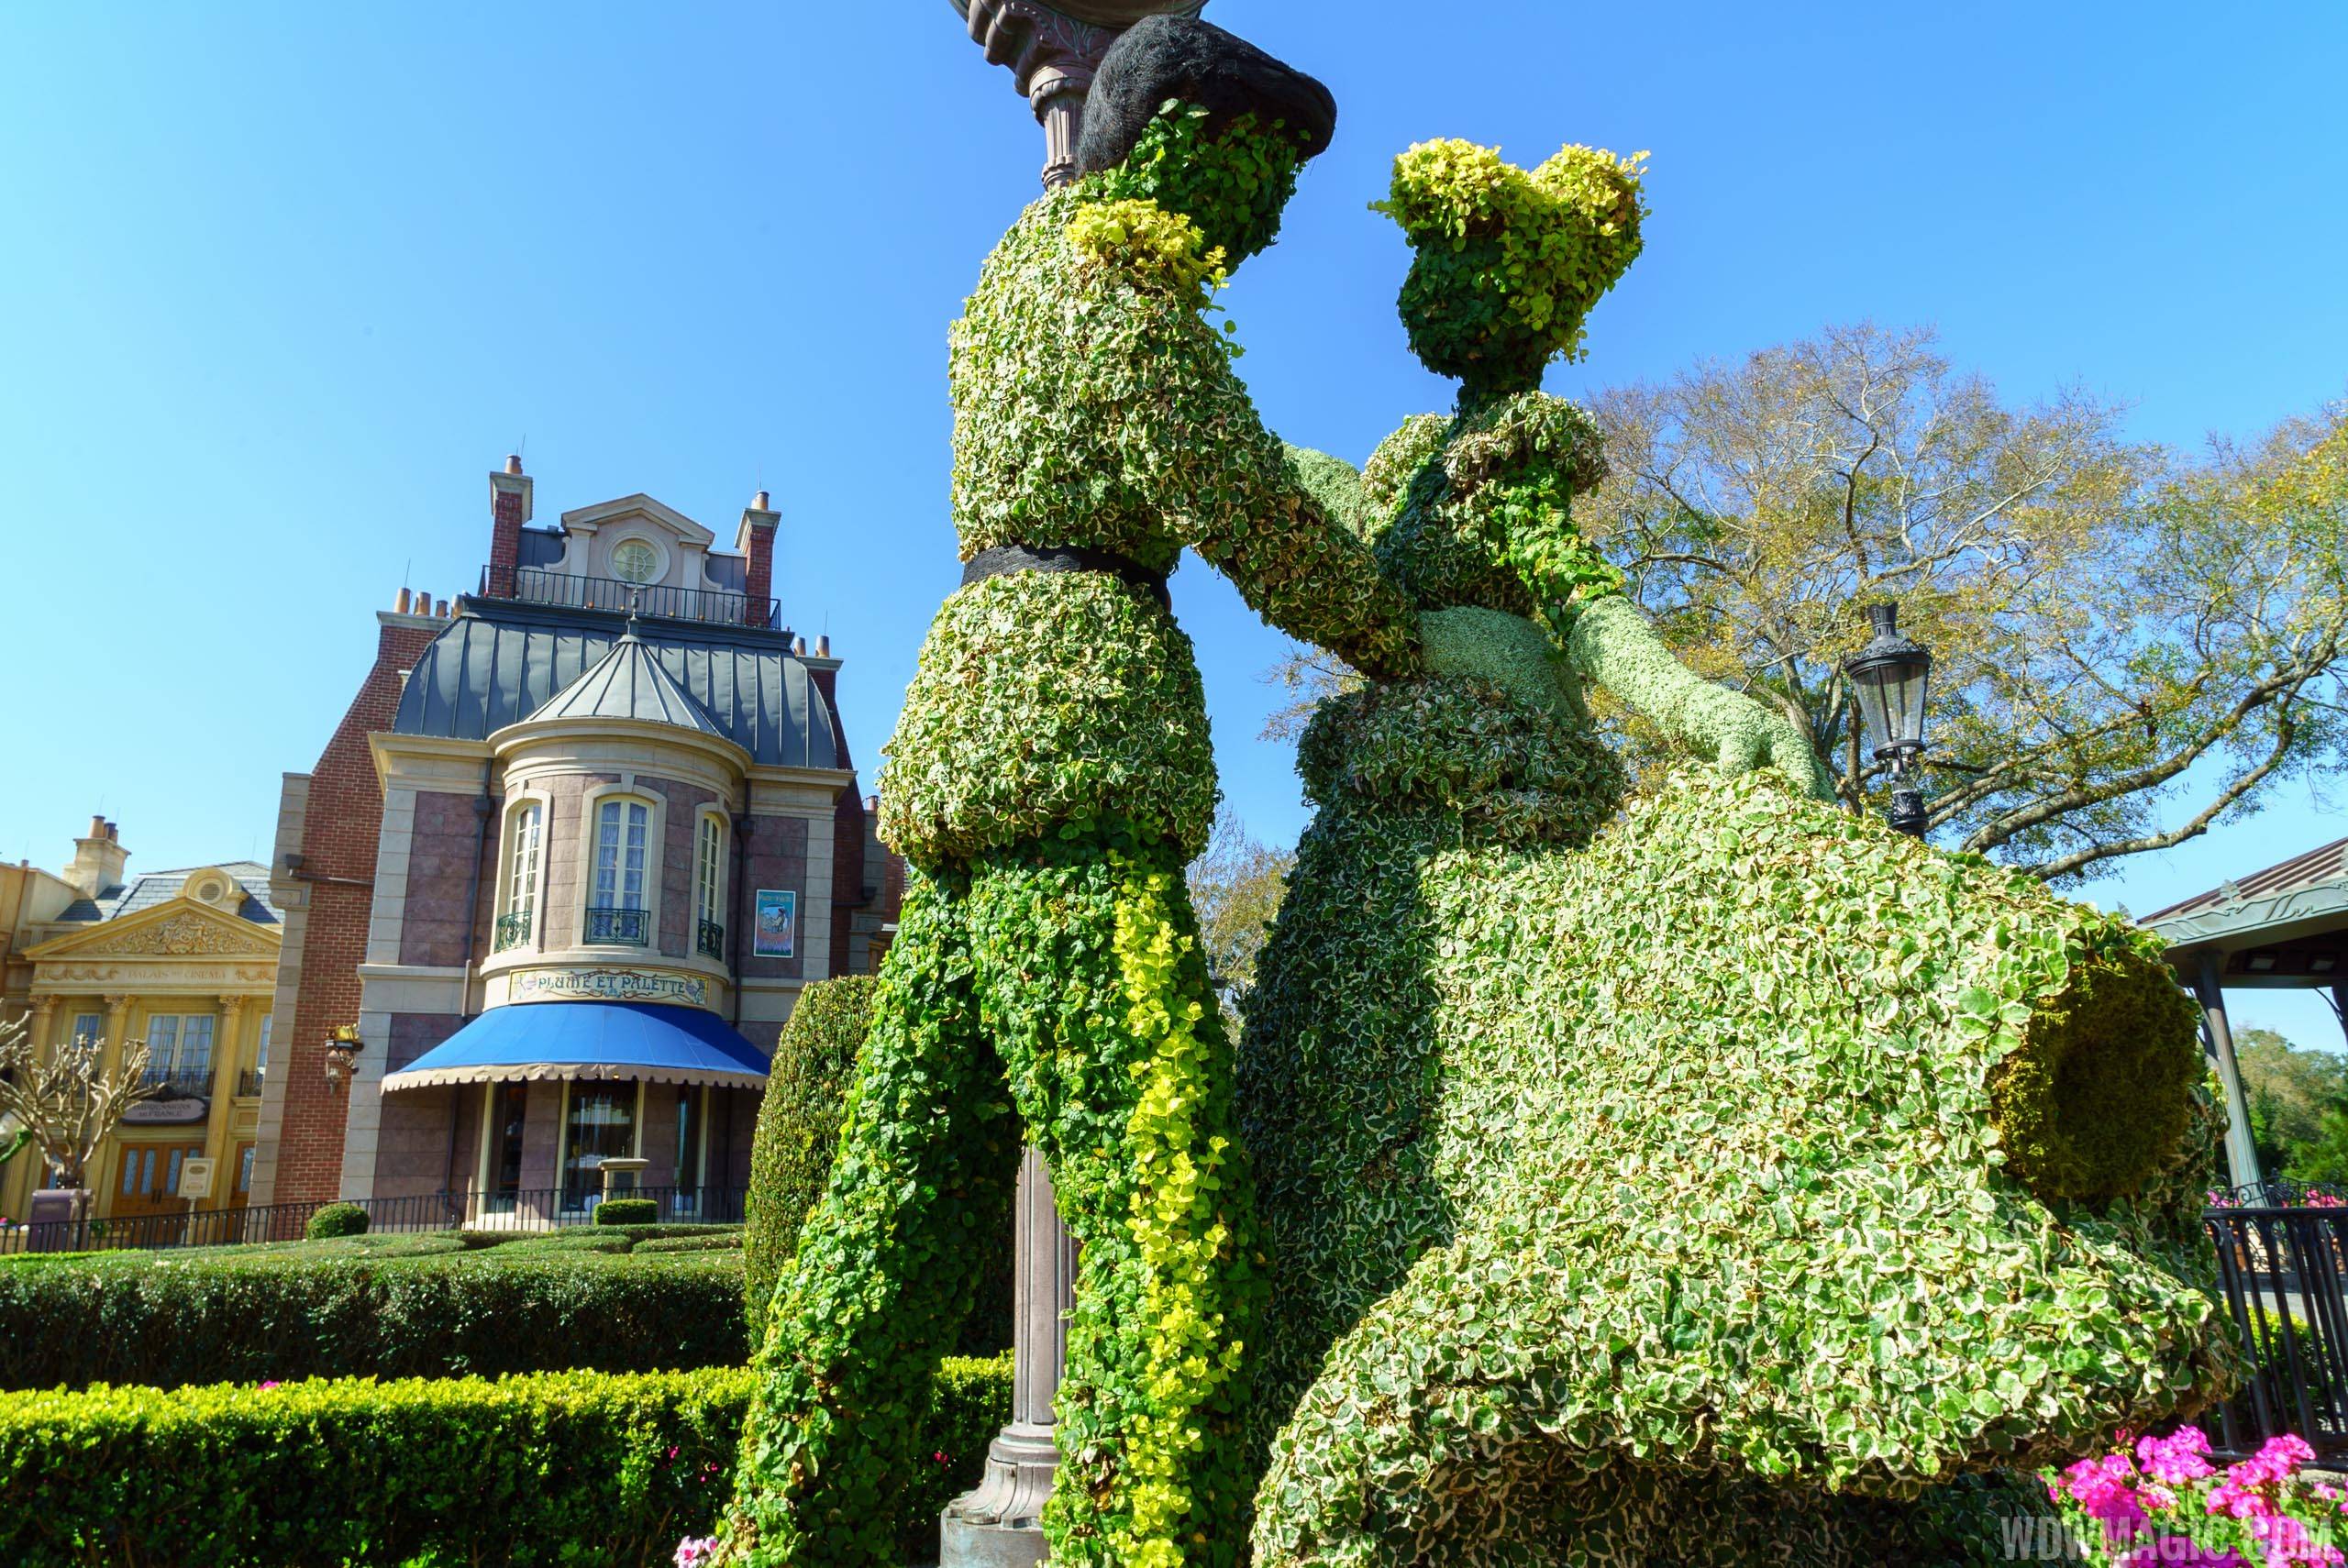 2016 Epcot International Flower and Garden Festival - Cinderella and Prince Charming